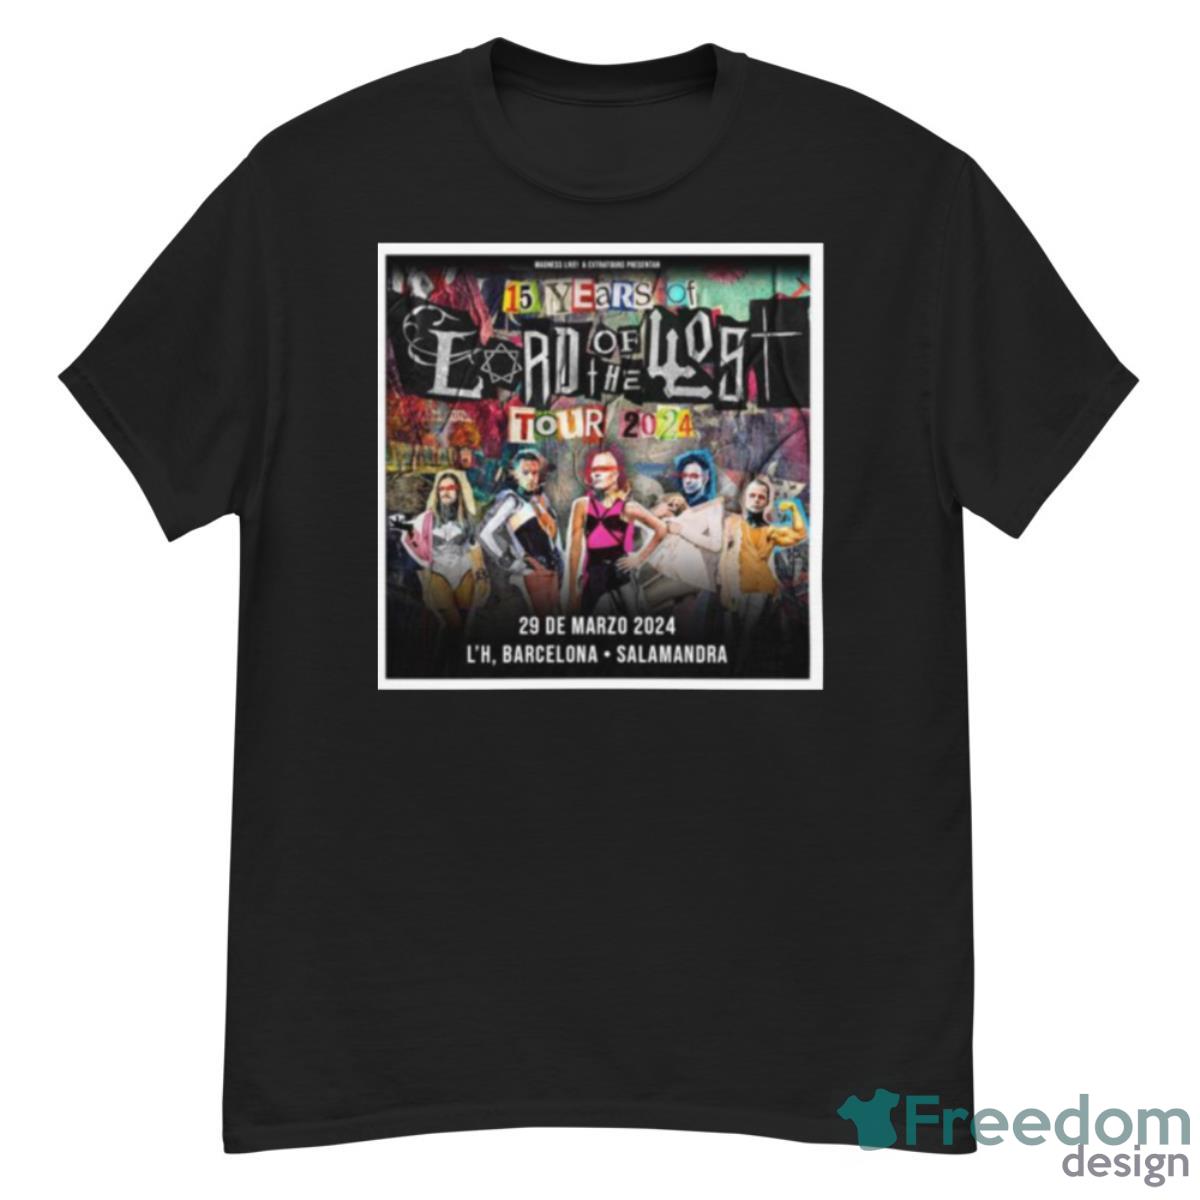 15 Years Of Lord Of The Lost Tour 2024 Shirt - G500 Men’s Classic T-Shirt